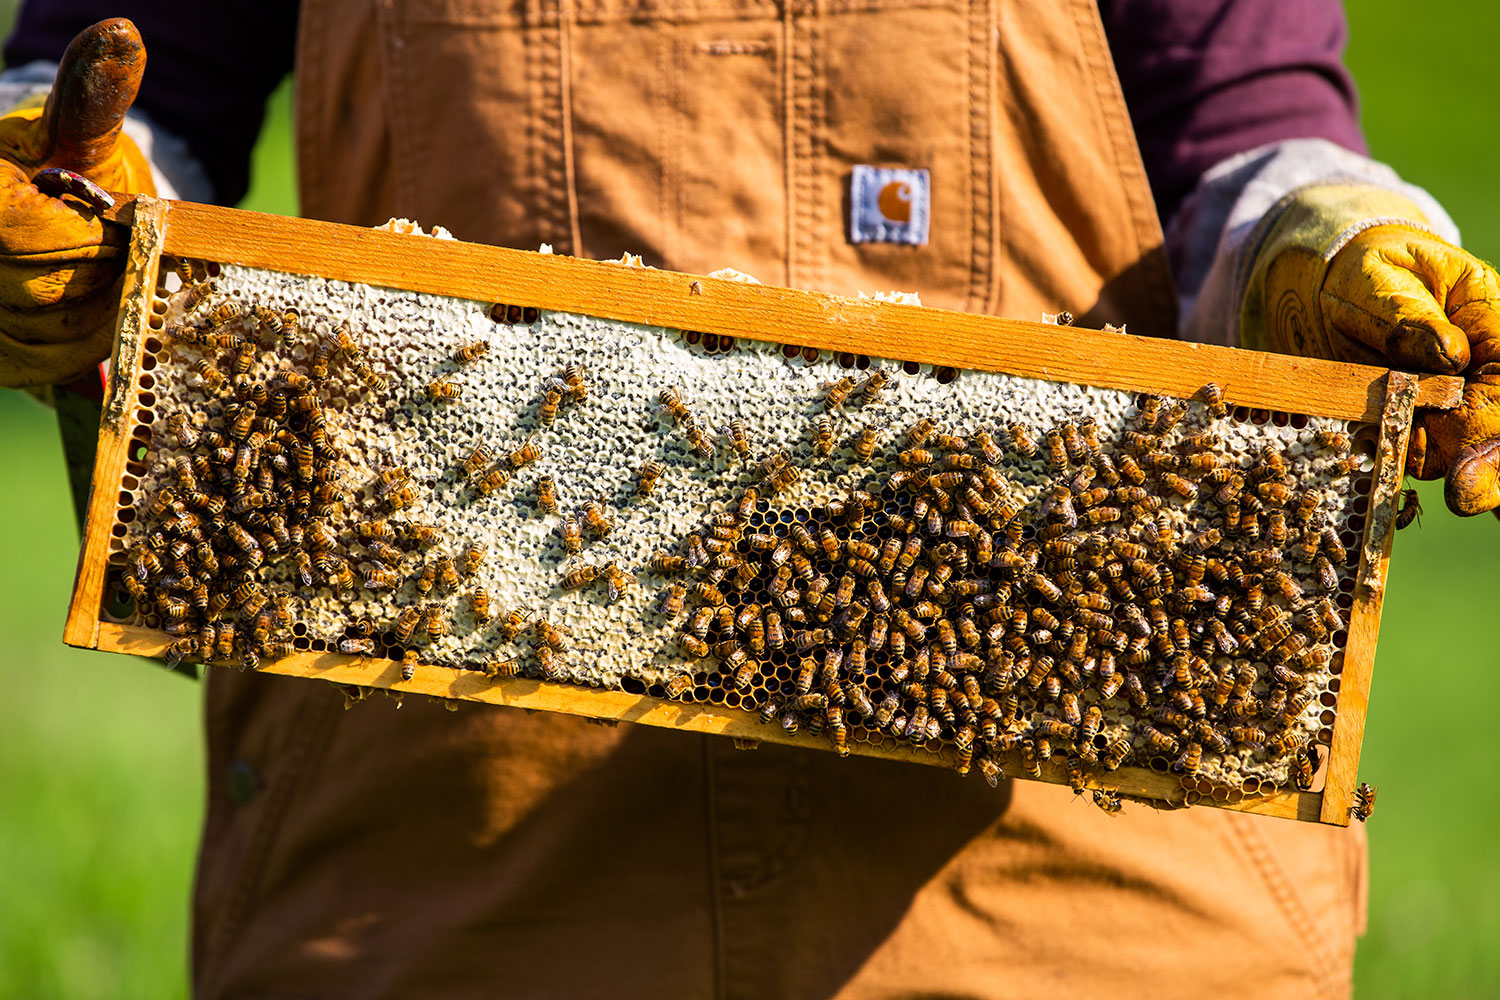 Messner Bee Farm in Kansas City / Crafted in Carhartt